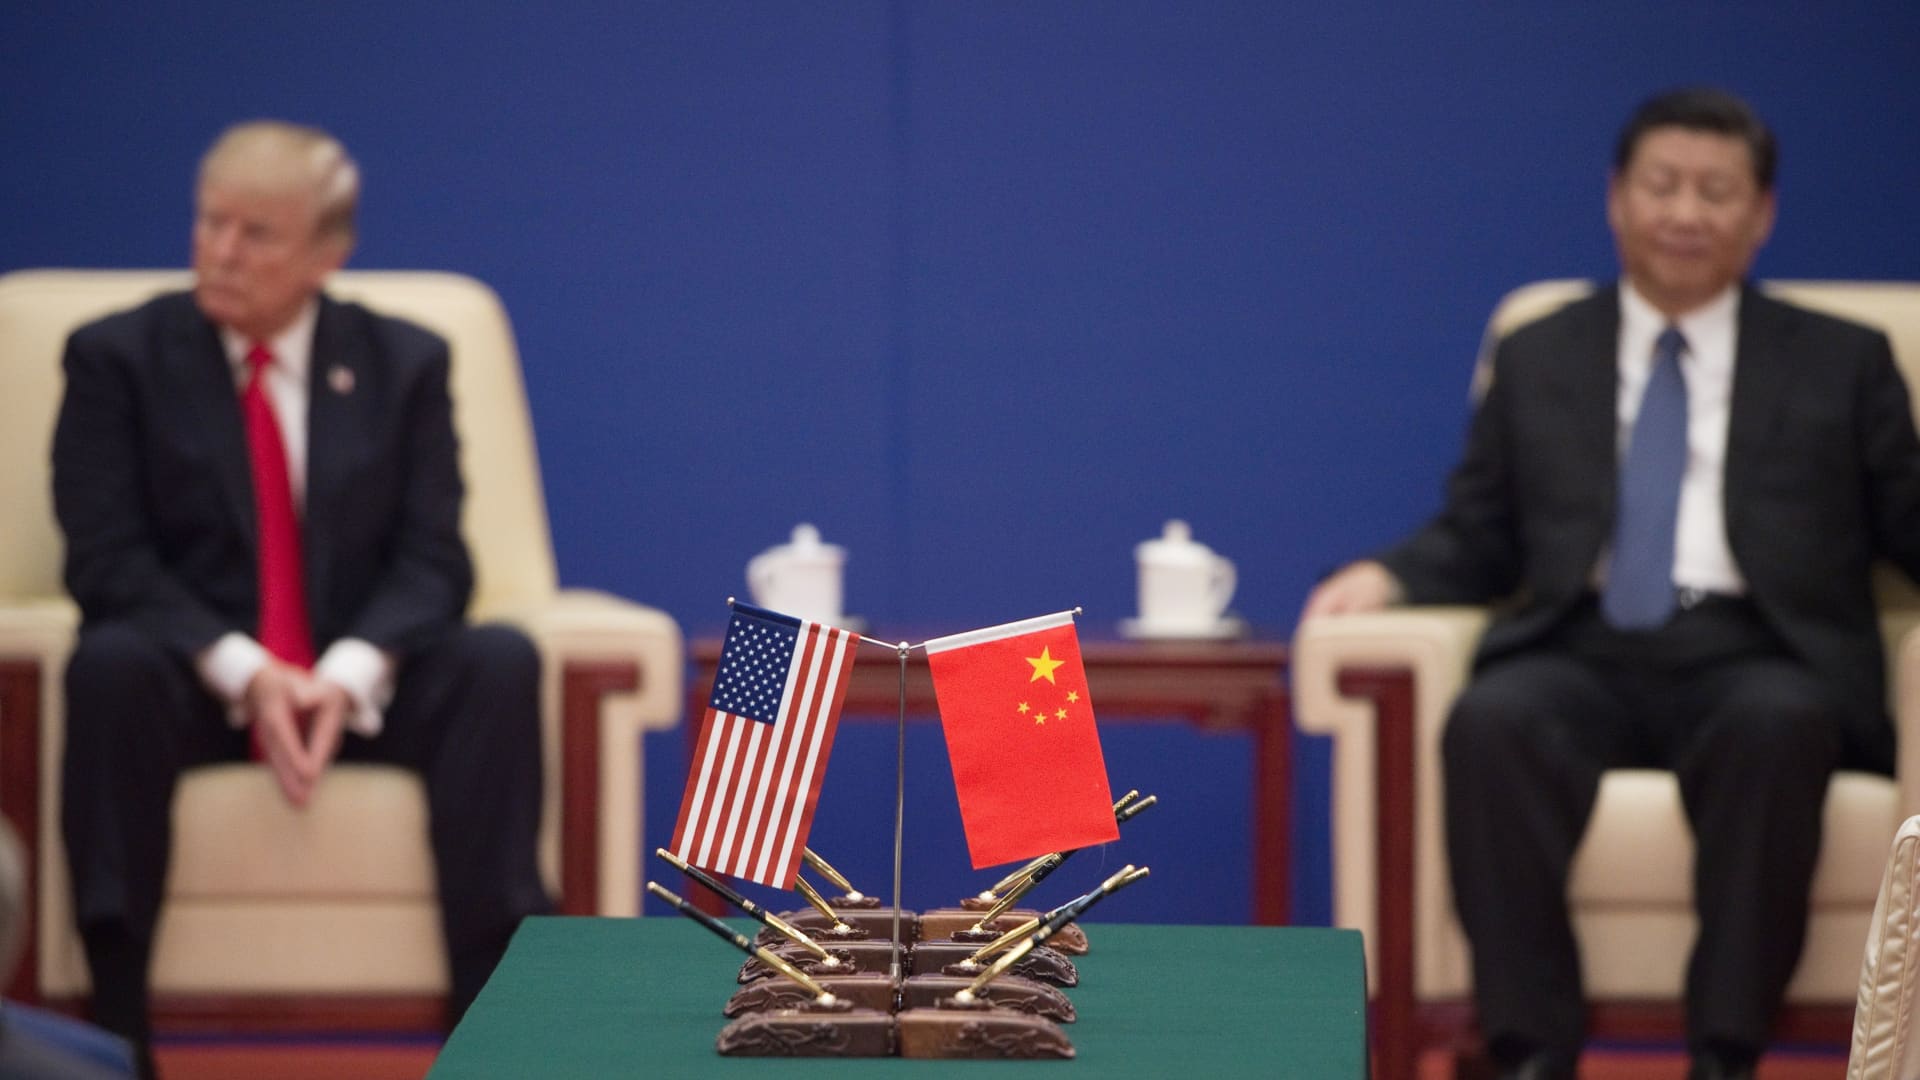 The U.S. and China could slip into a 'new cold war' that pushes countries to pick sides